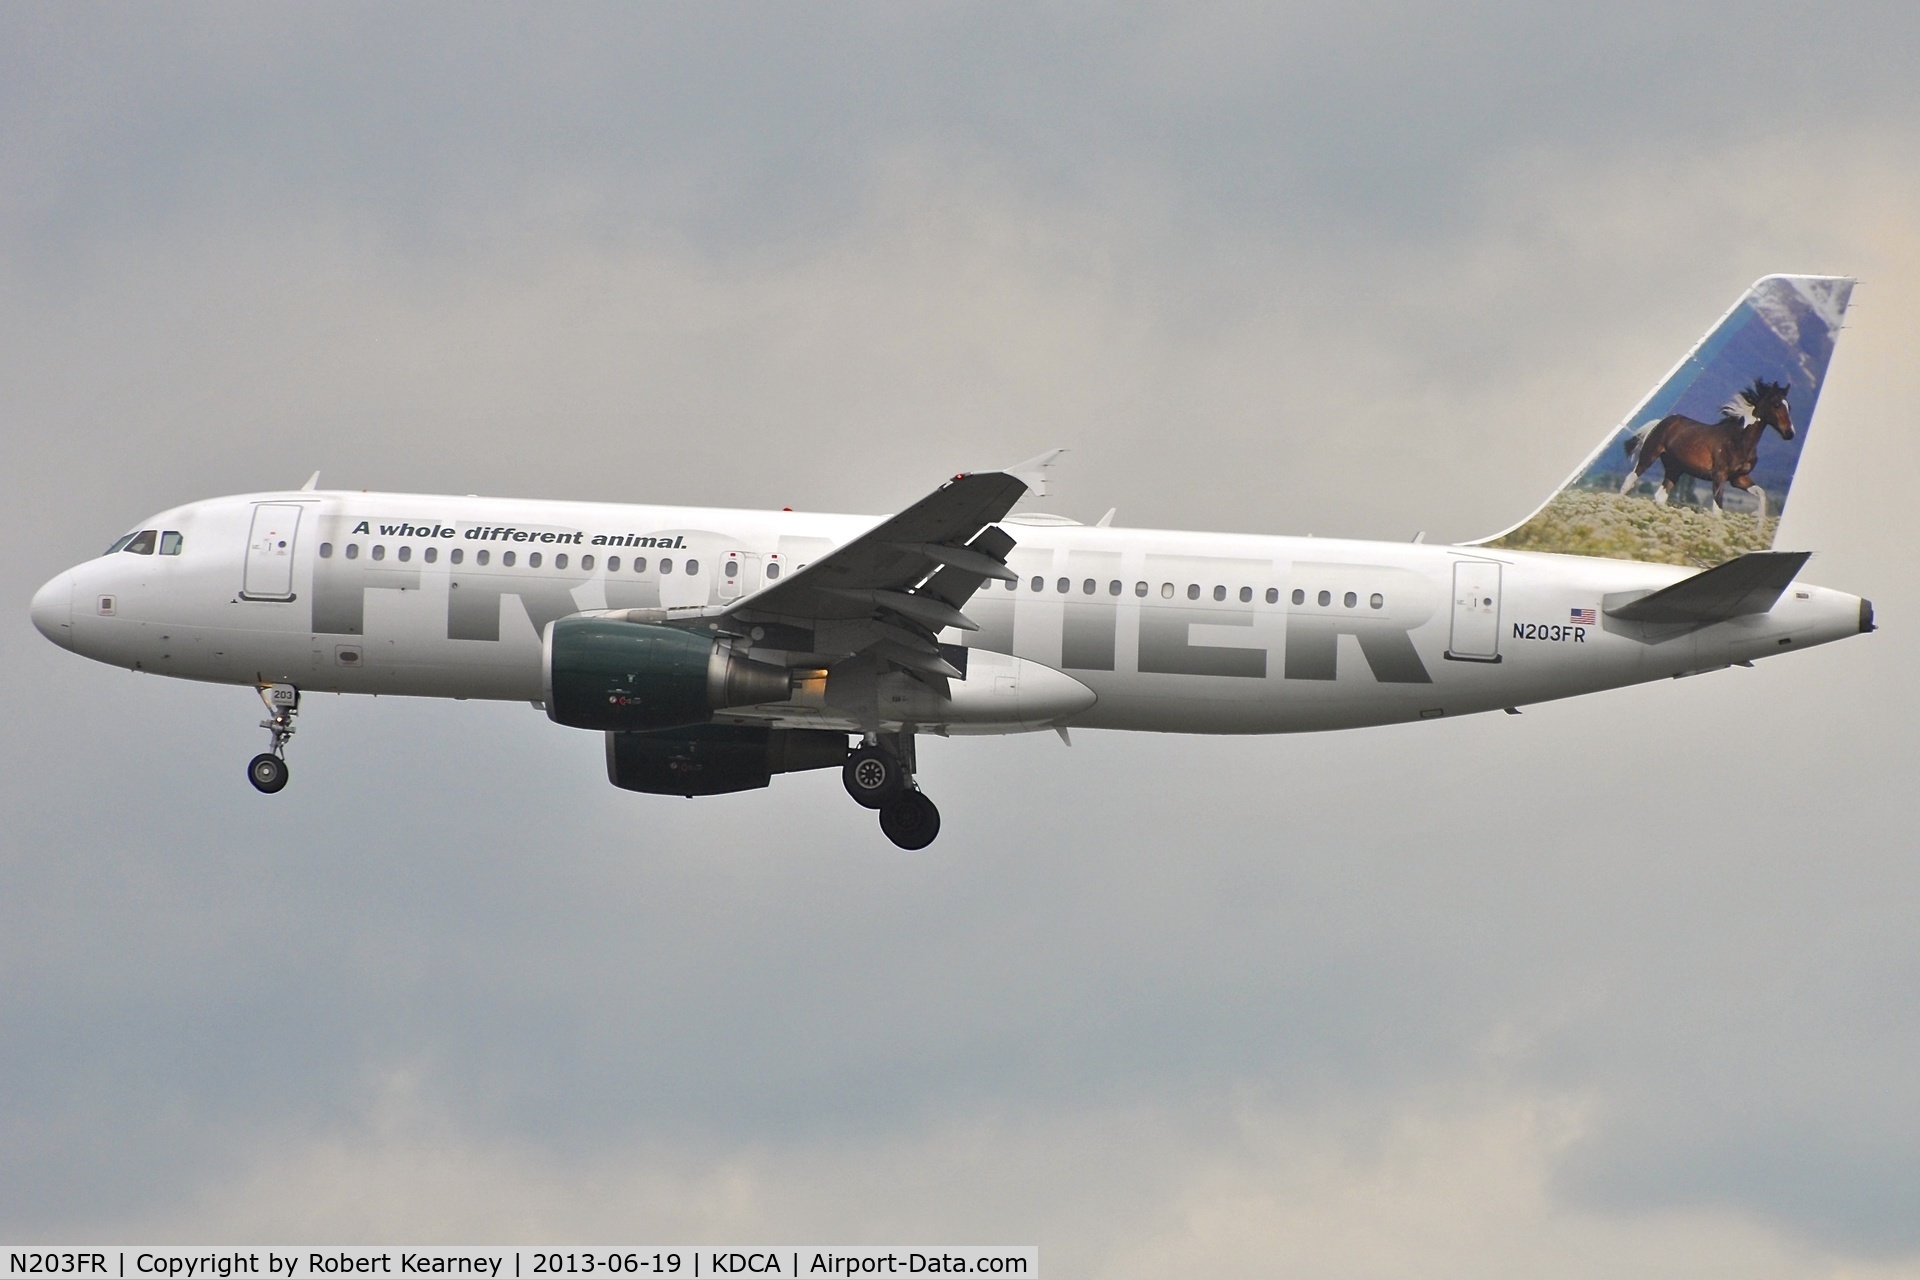 N203FR, 2002 Airbus A320-214 C/N 1806, On short finals for r/w 1